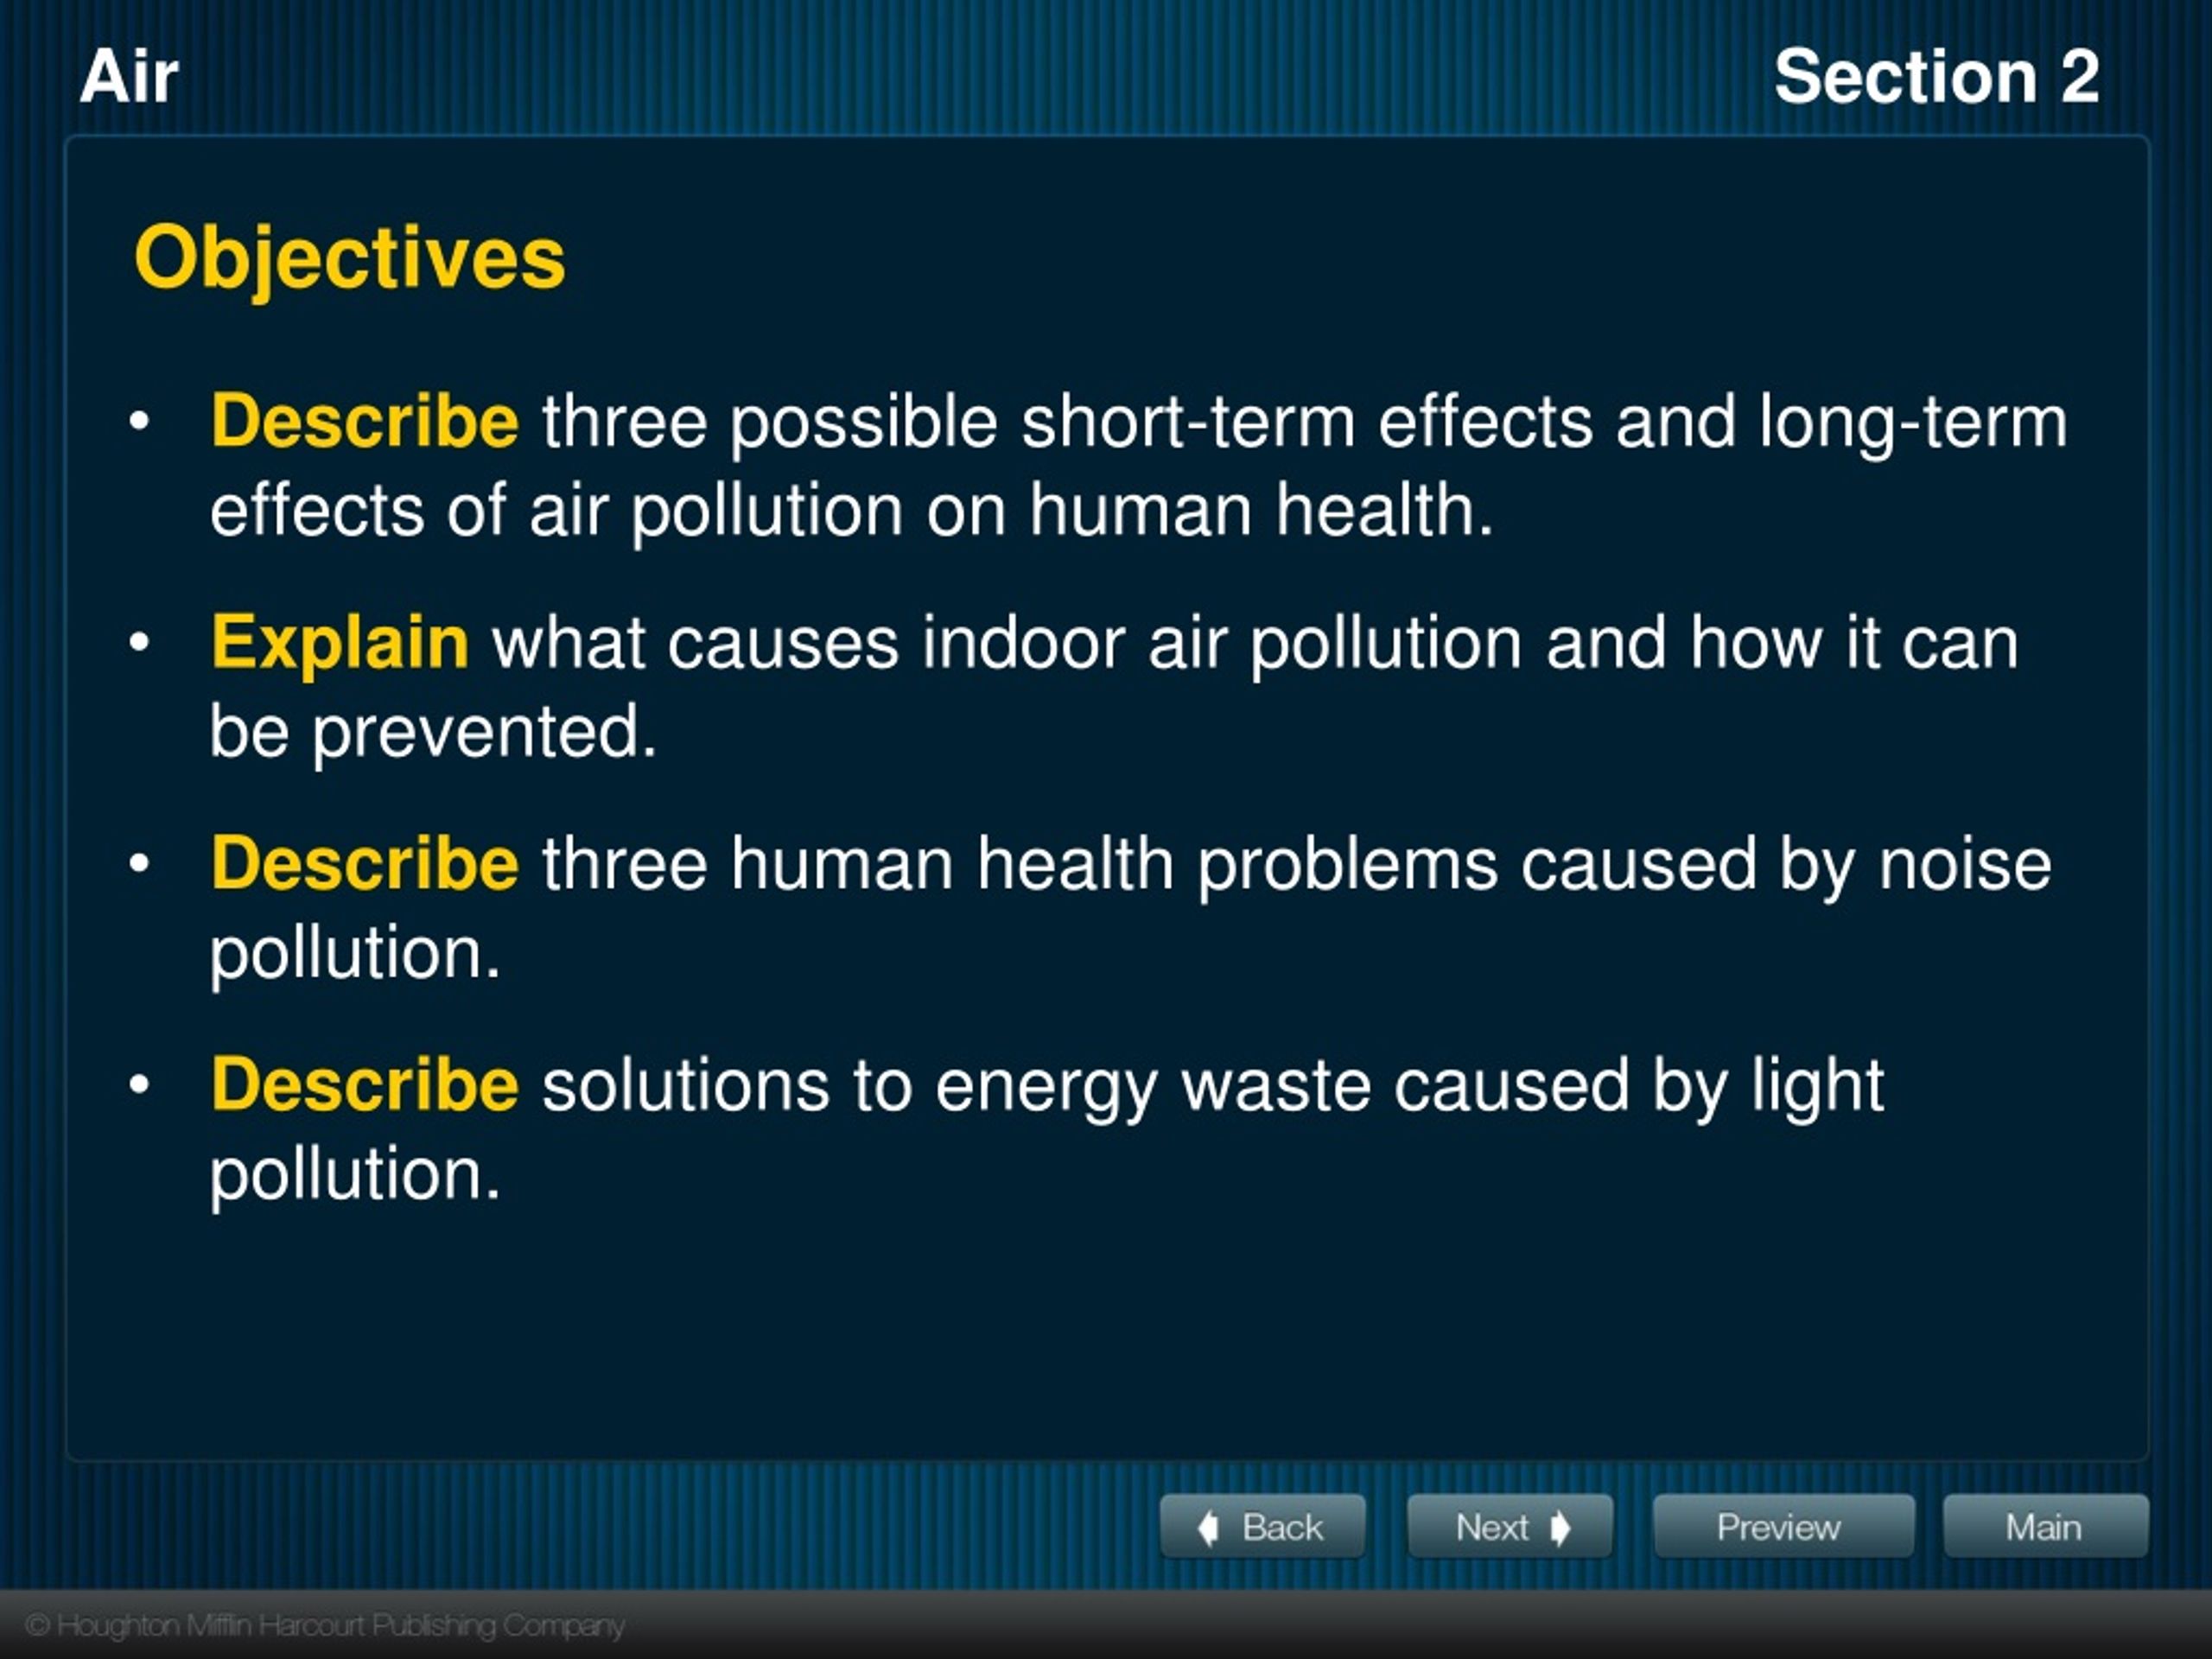 research objectives of air pollution